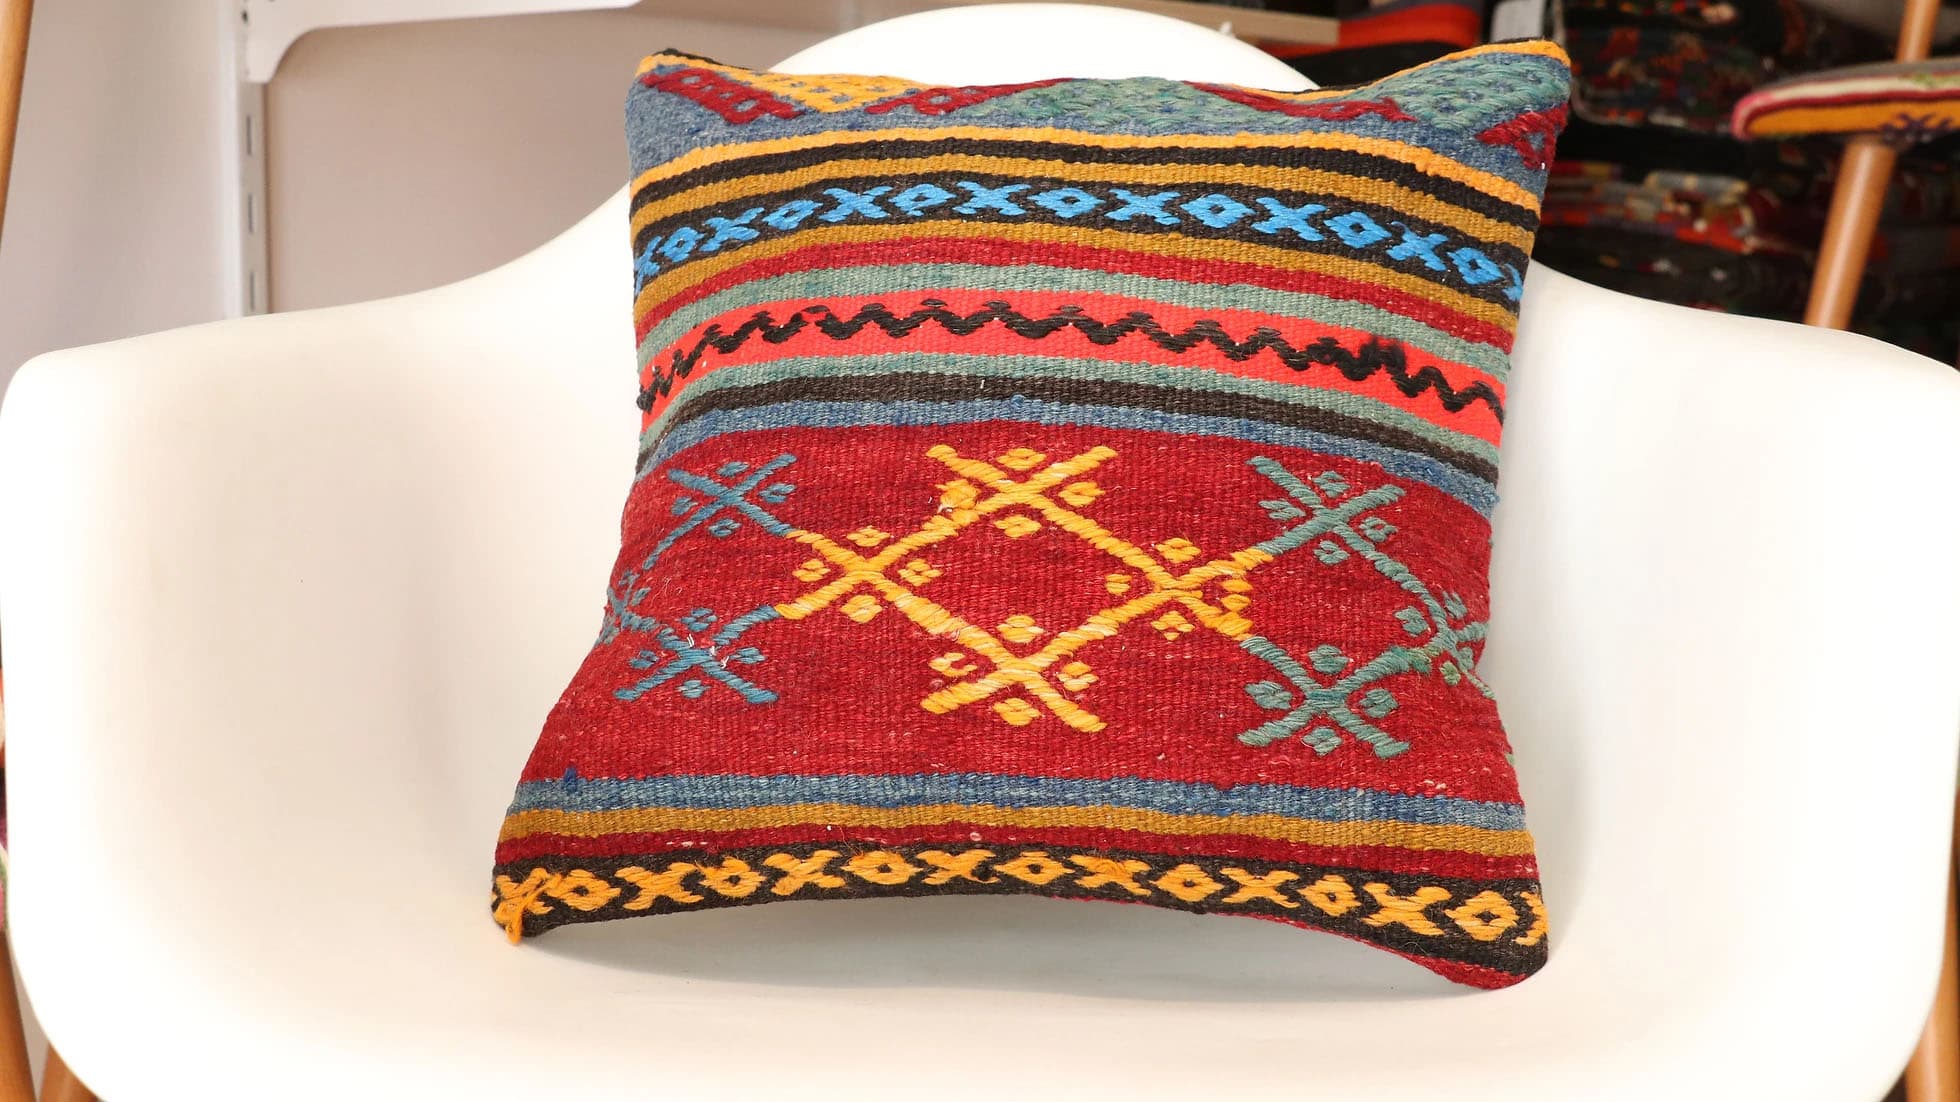 Vintage Handwoven Kilim Pillow in Polychromatic Tribal Motifs by Kilim Couture NYC Rug Gallery